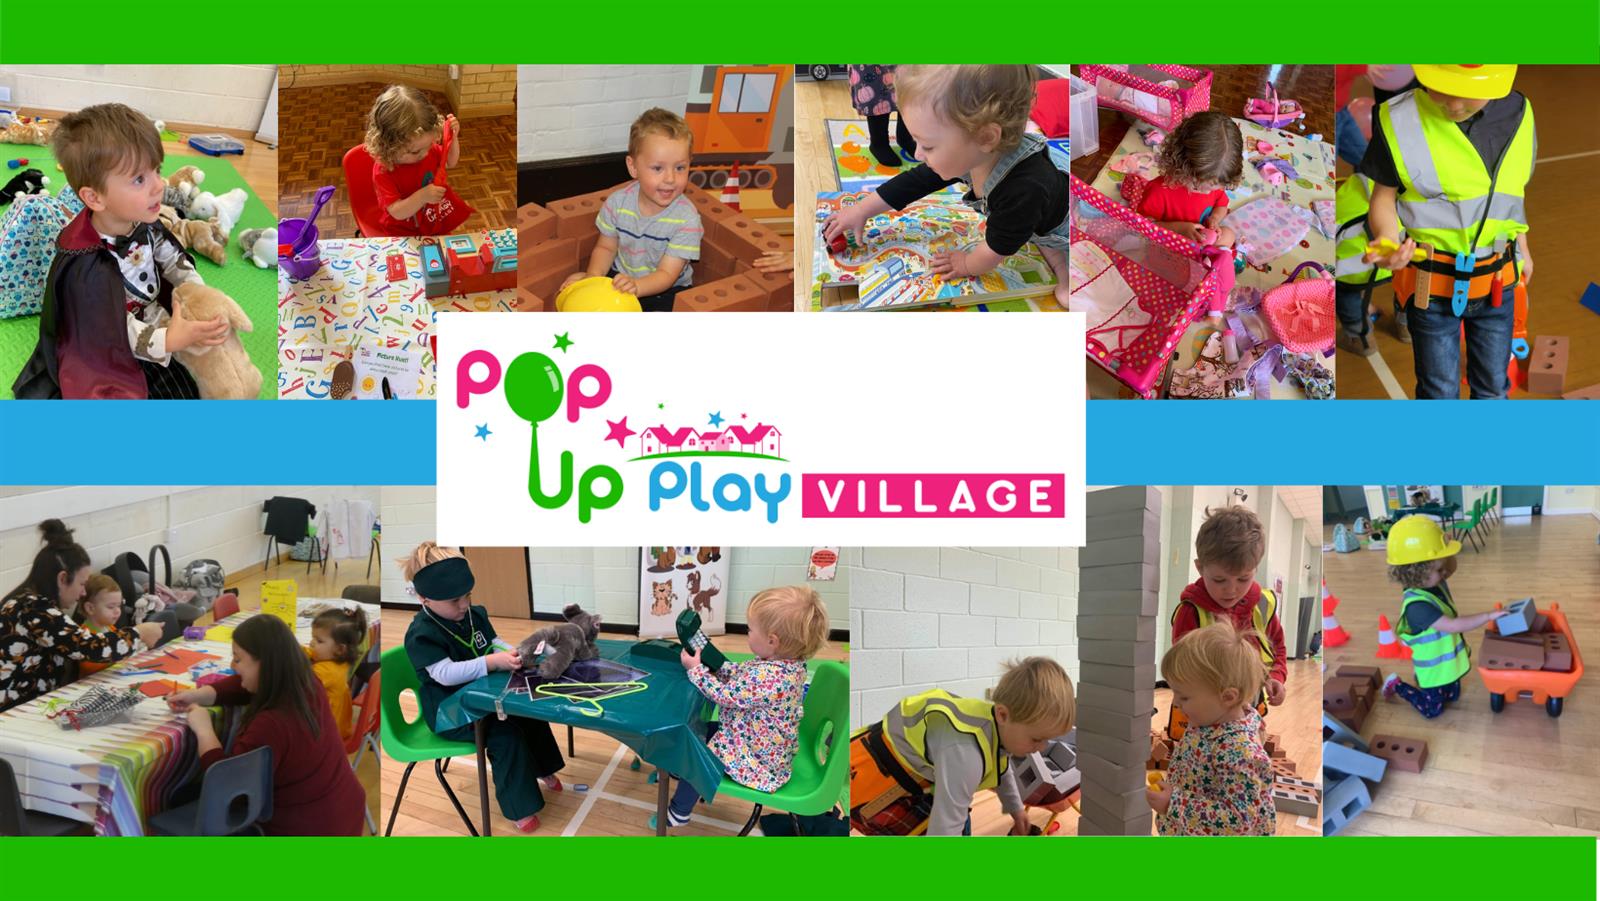 zPop Up Play Village South Somerset community image